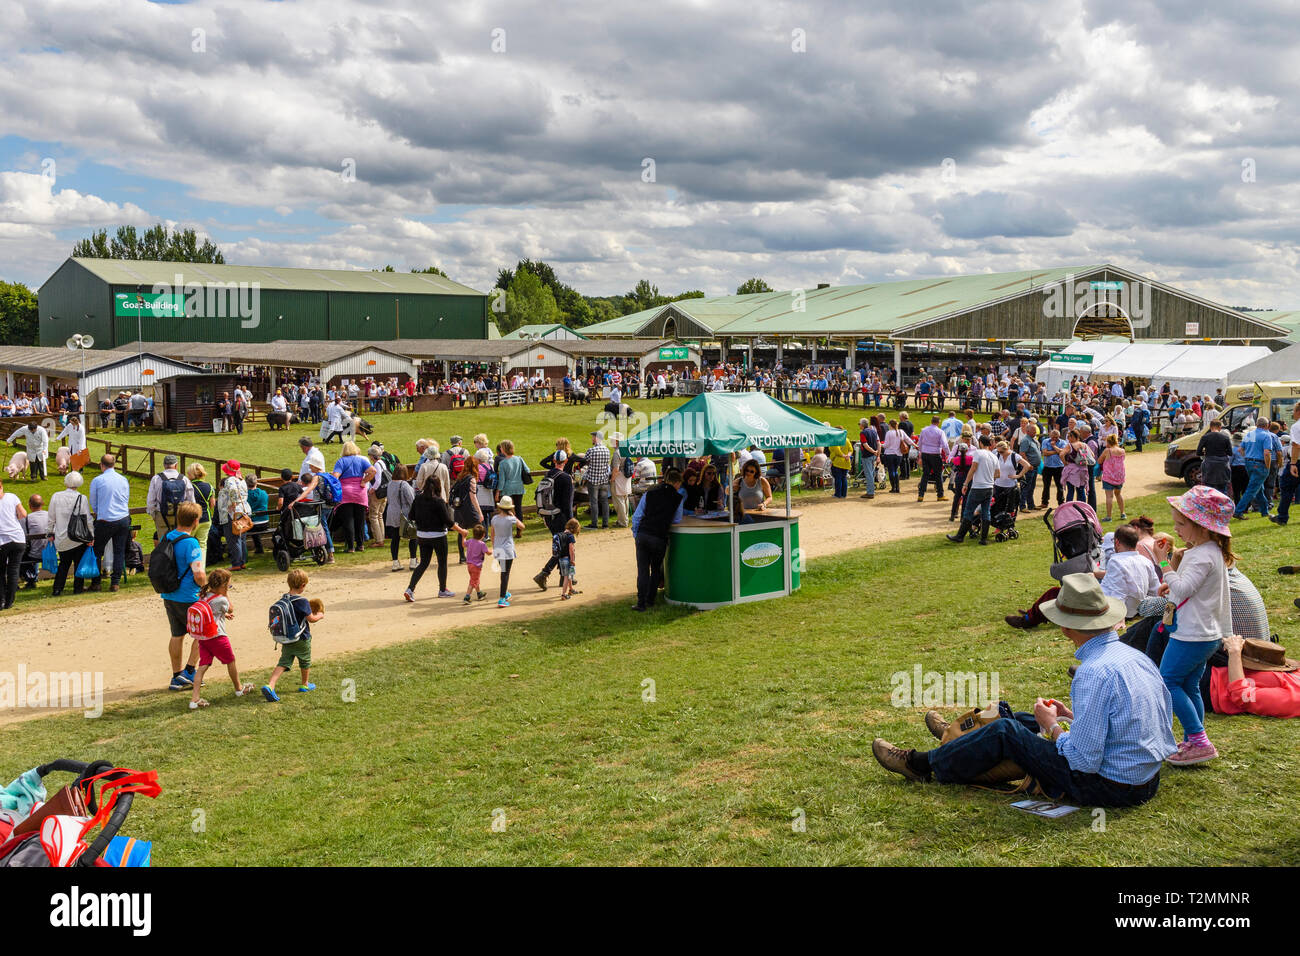 Day out for large crowd of people by showrings, sitting in sun & standing watching pigs in competition - Great Yorkshire Show, Harrogate, England, UK. Stock Photo